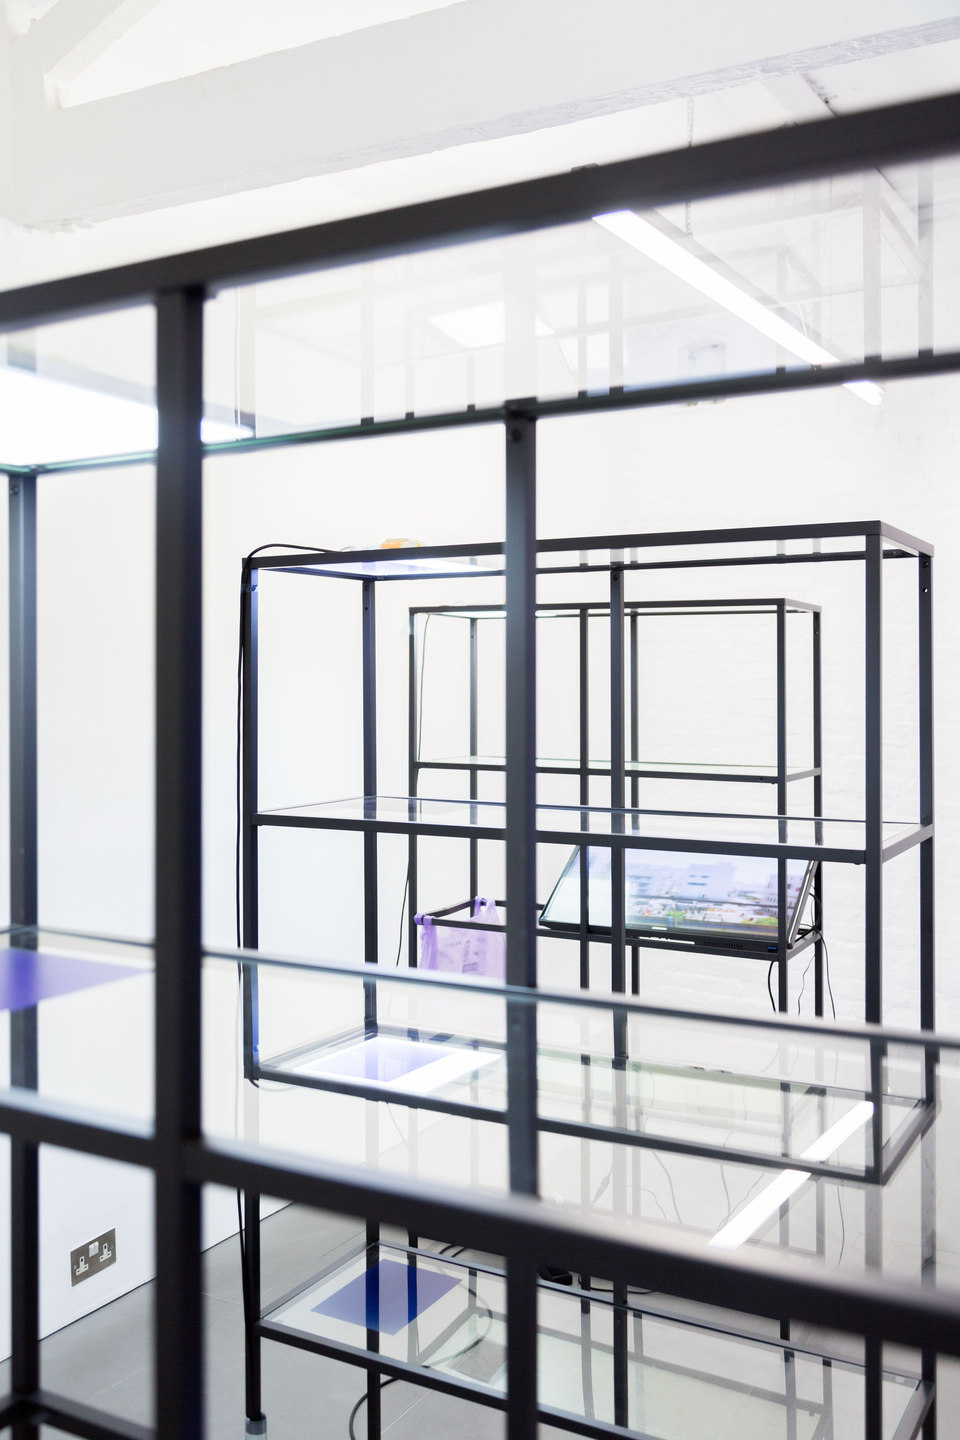 Yuri Pattison, Free Traveller, 2014, installation view (main gallery), Cell Project Space